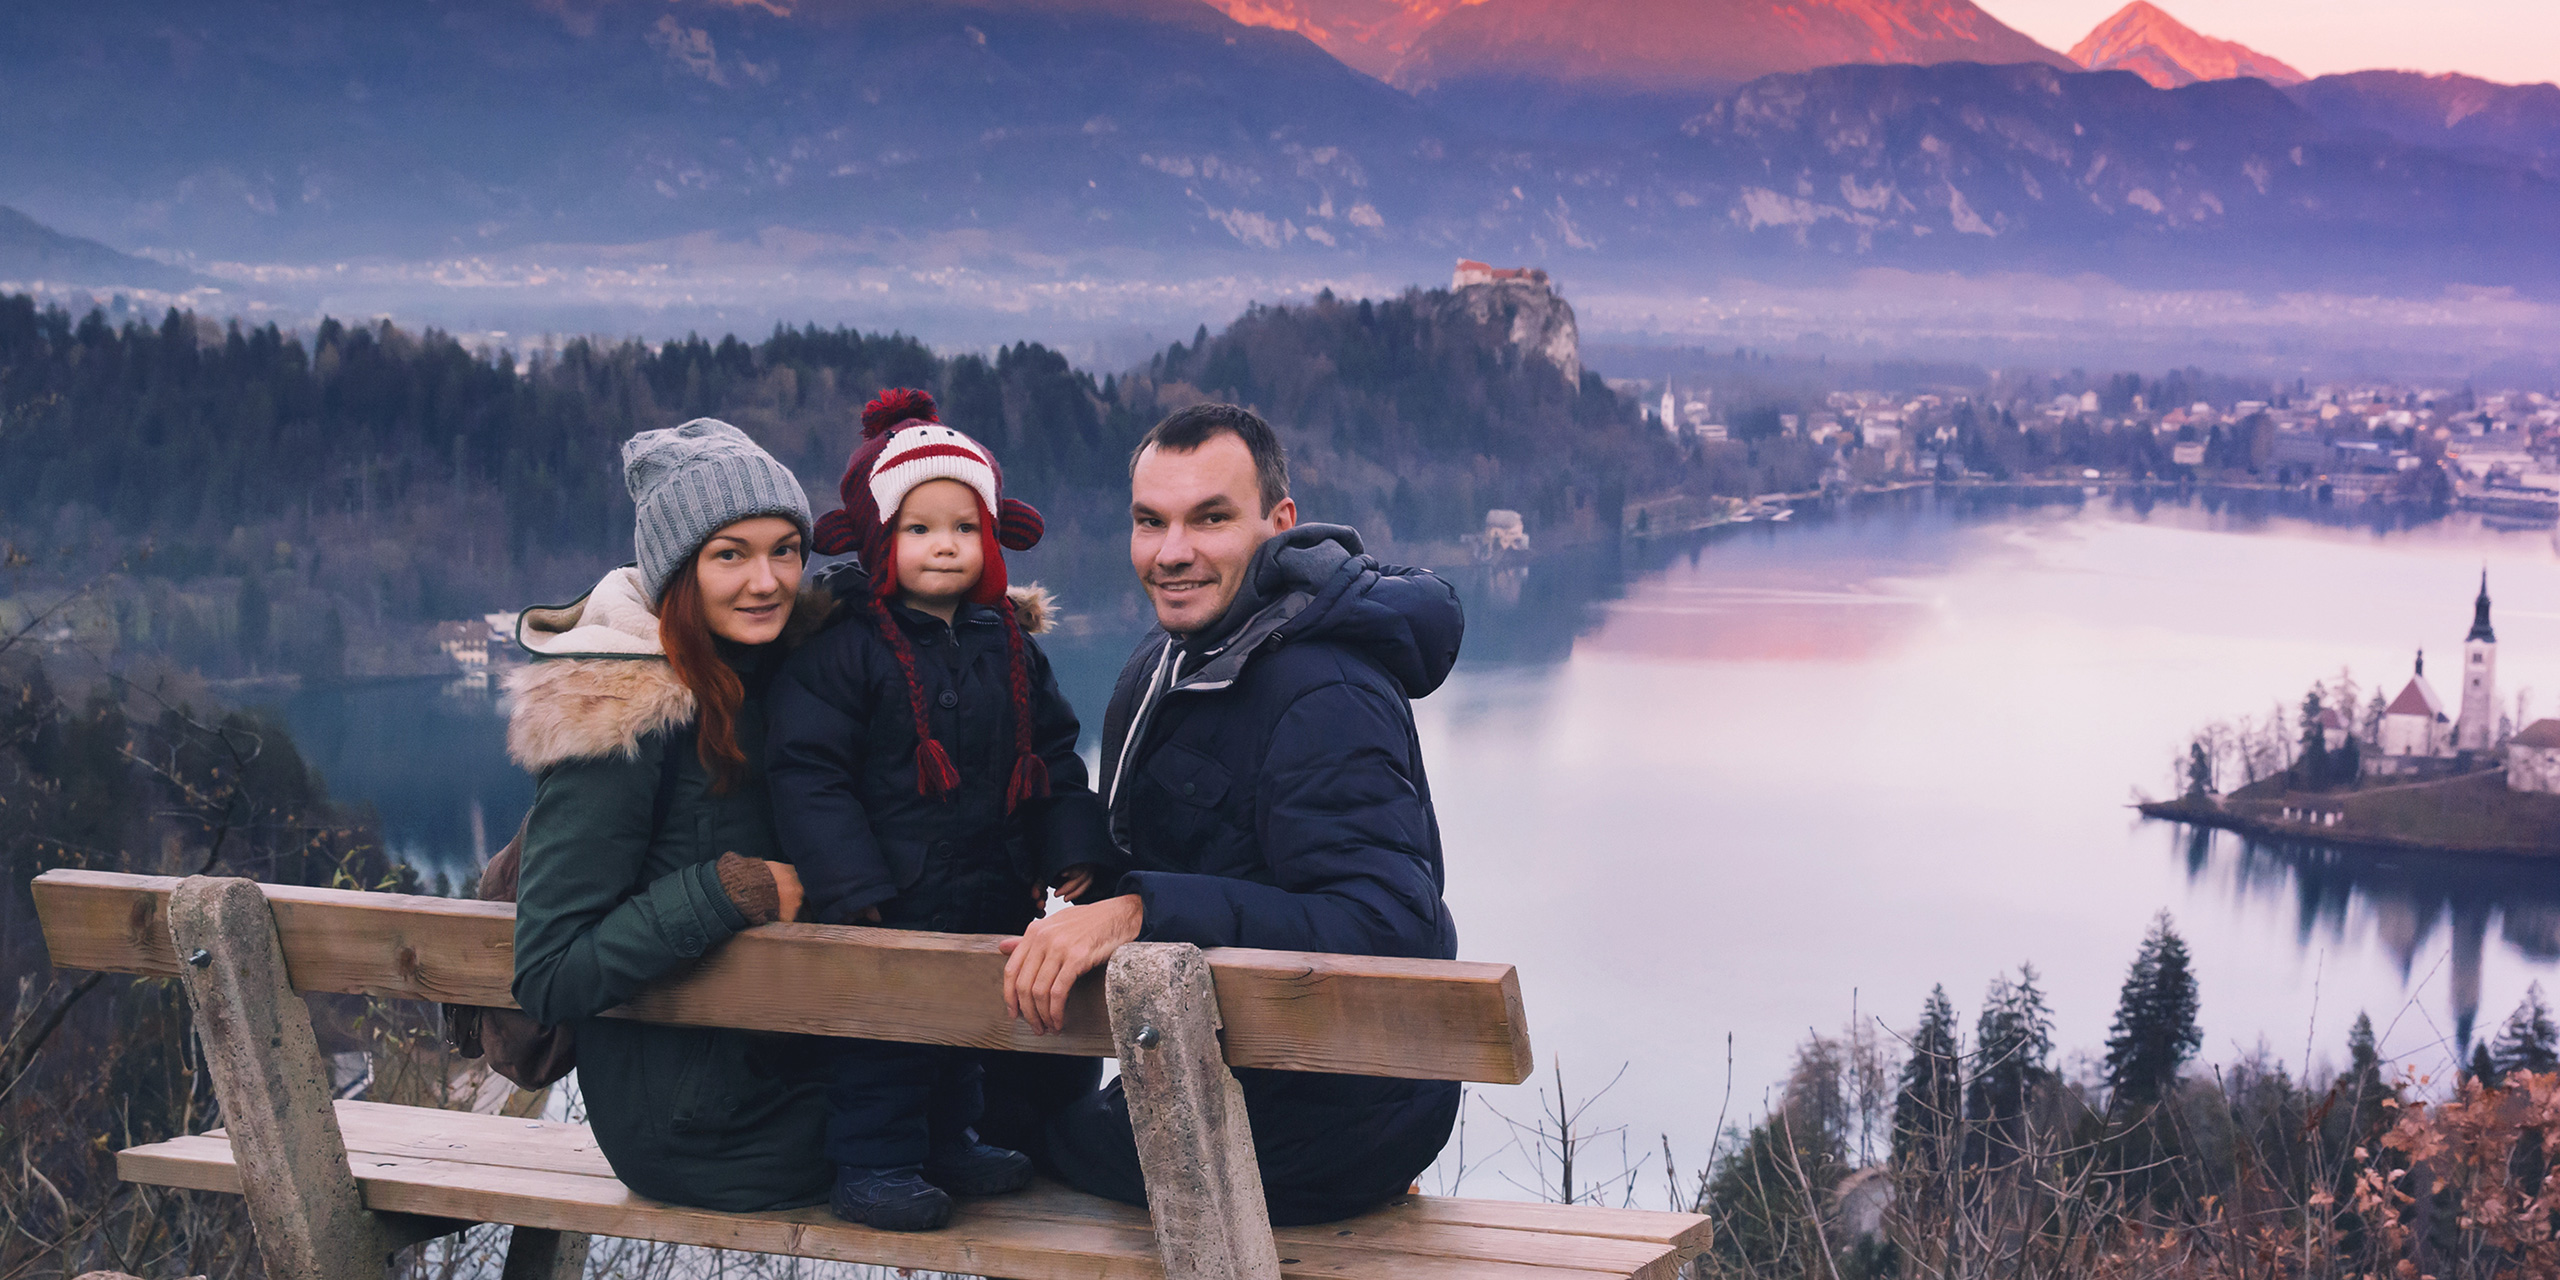 family posing for photo on lake bled in slovenia wearing weinter gear; Courtesy of Natalia Deriabina/Shutterstock